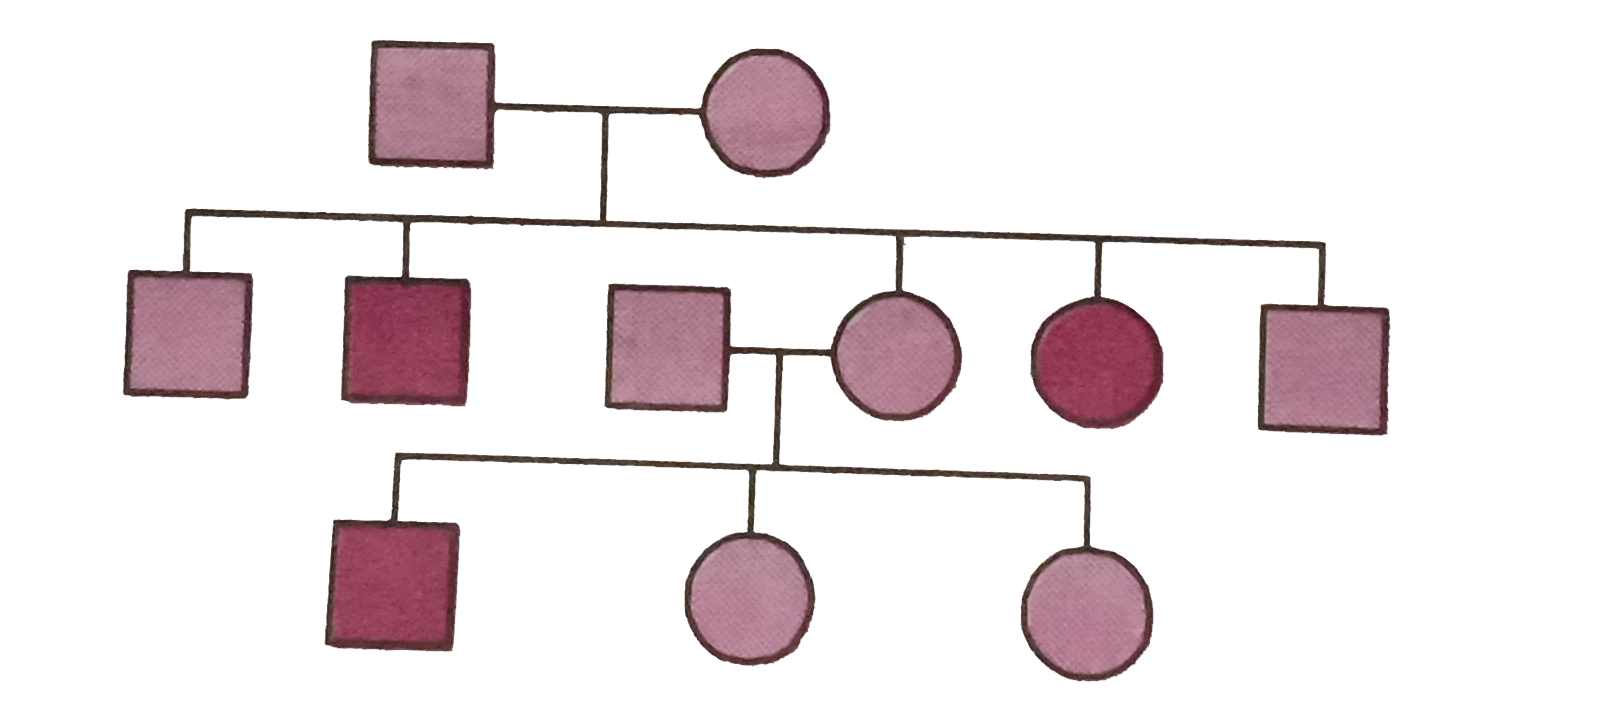 Study the pedigree chart what does it show?